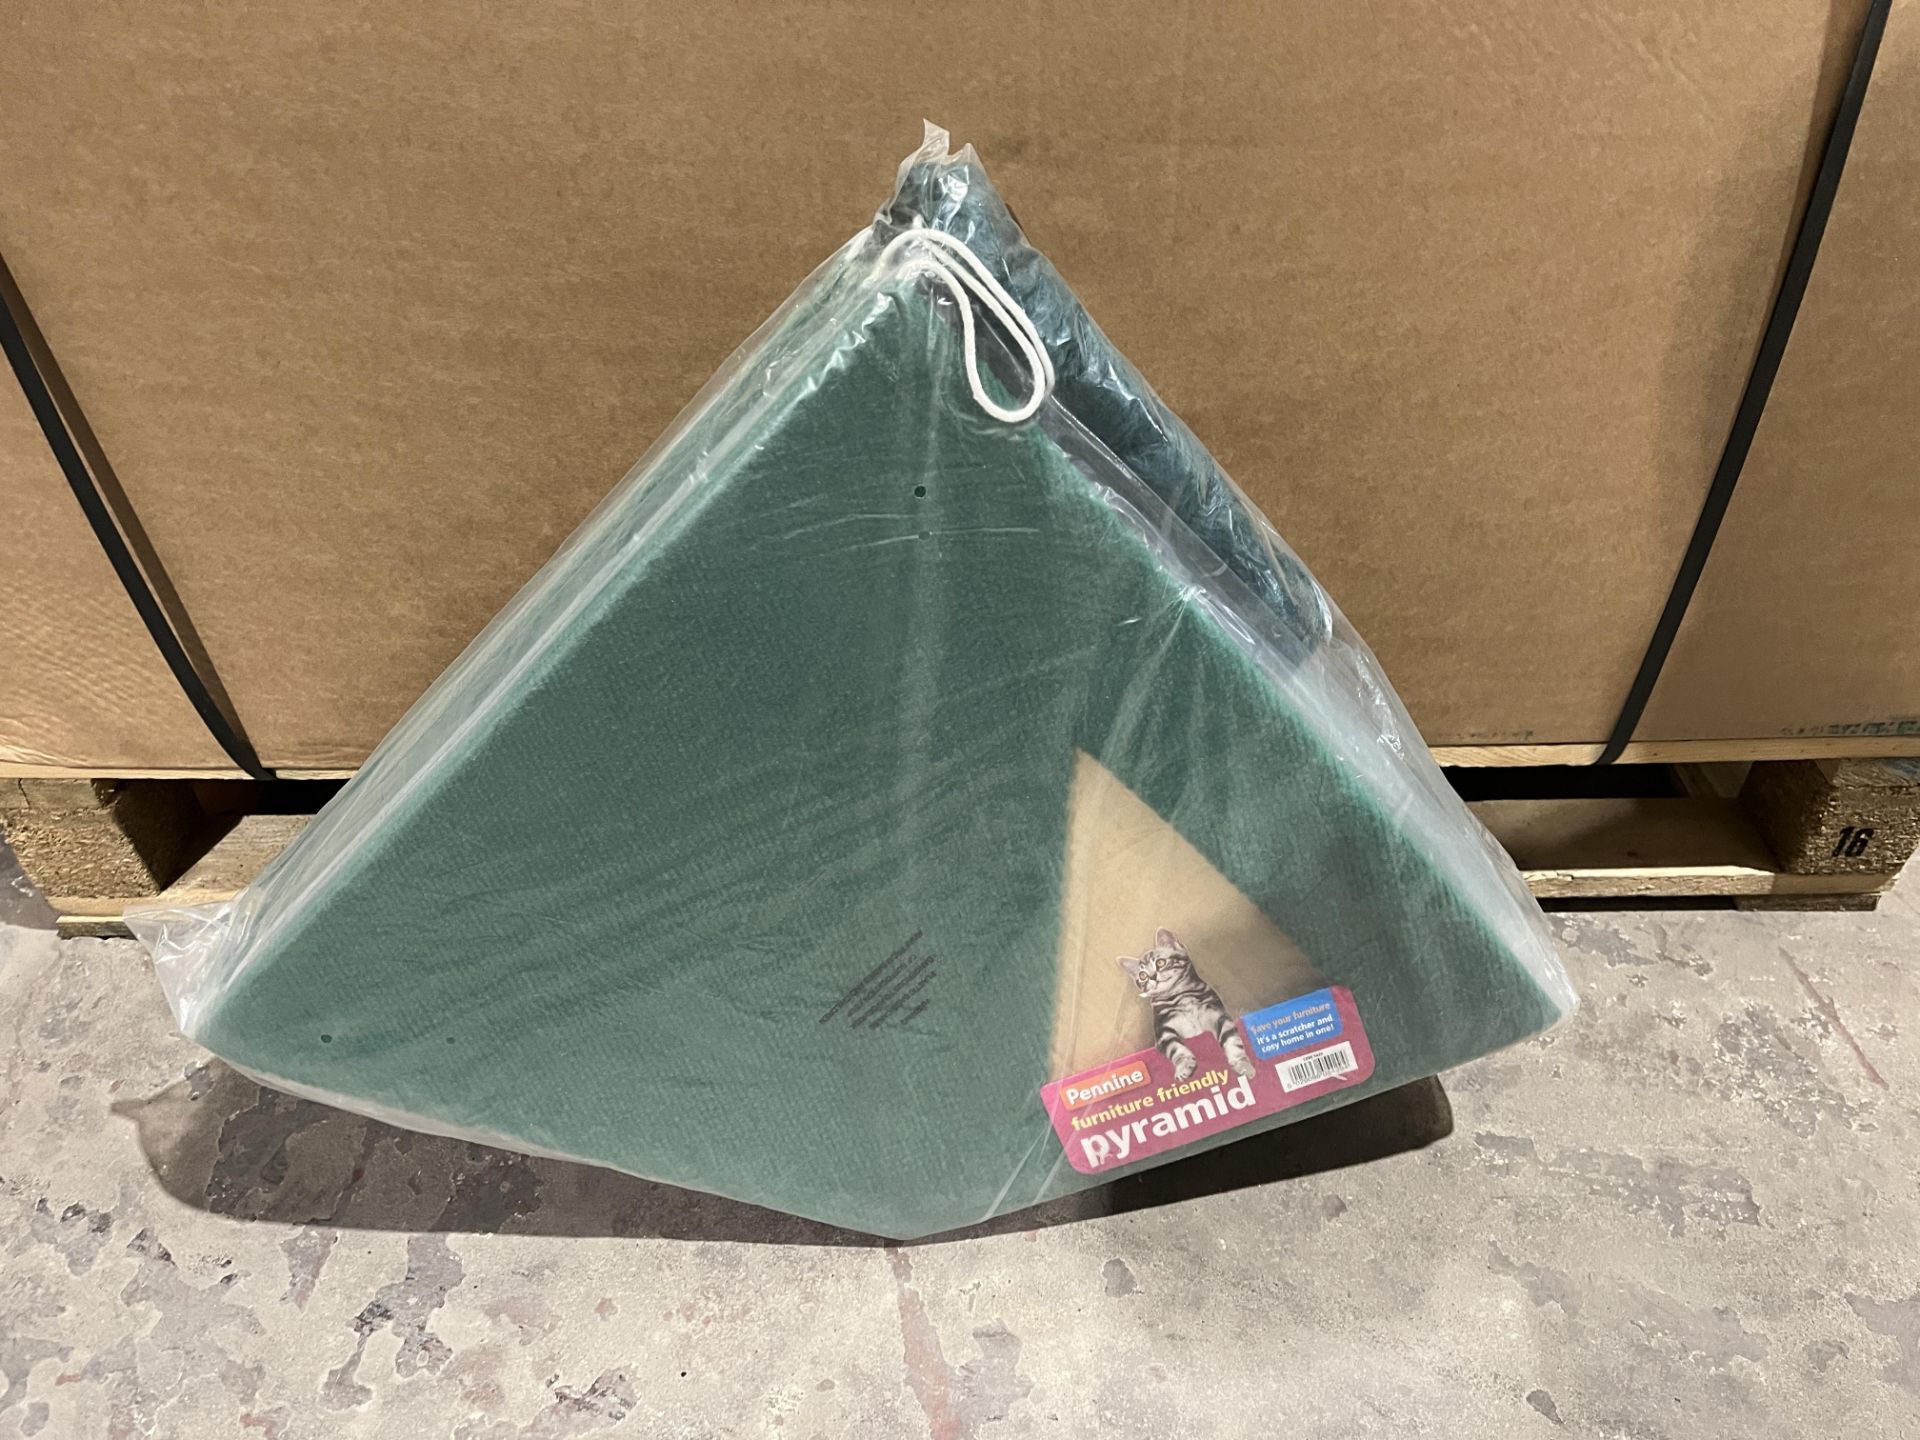 10 X BRAND NEW PENINE PYRAMID CAT HOUSES R5-1 - Image 2 of 2